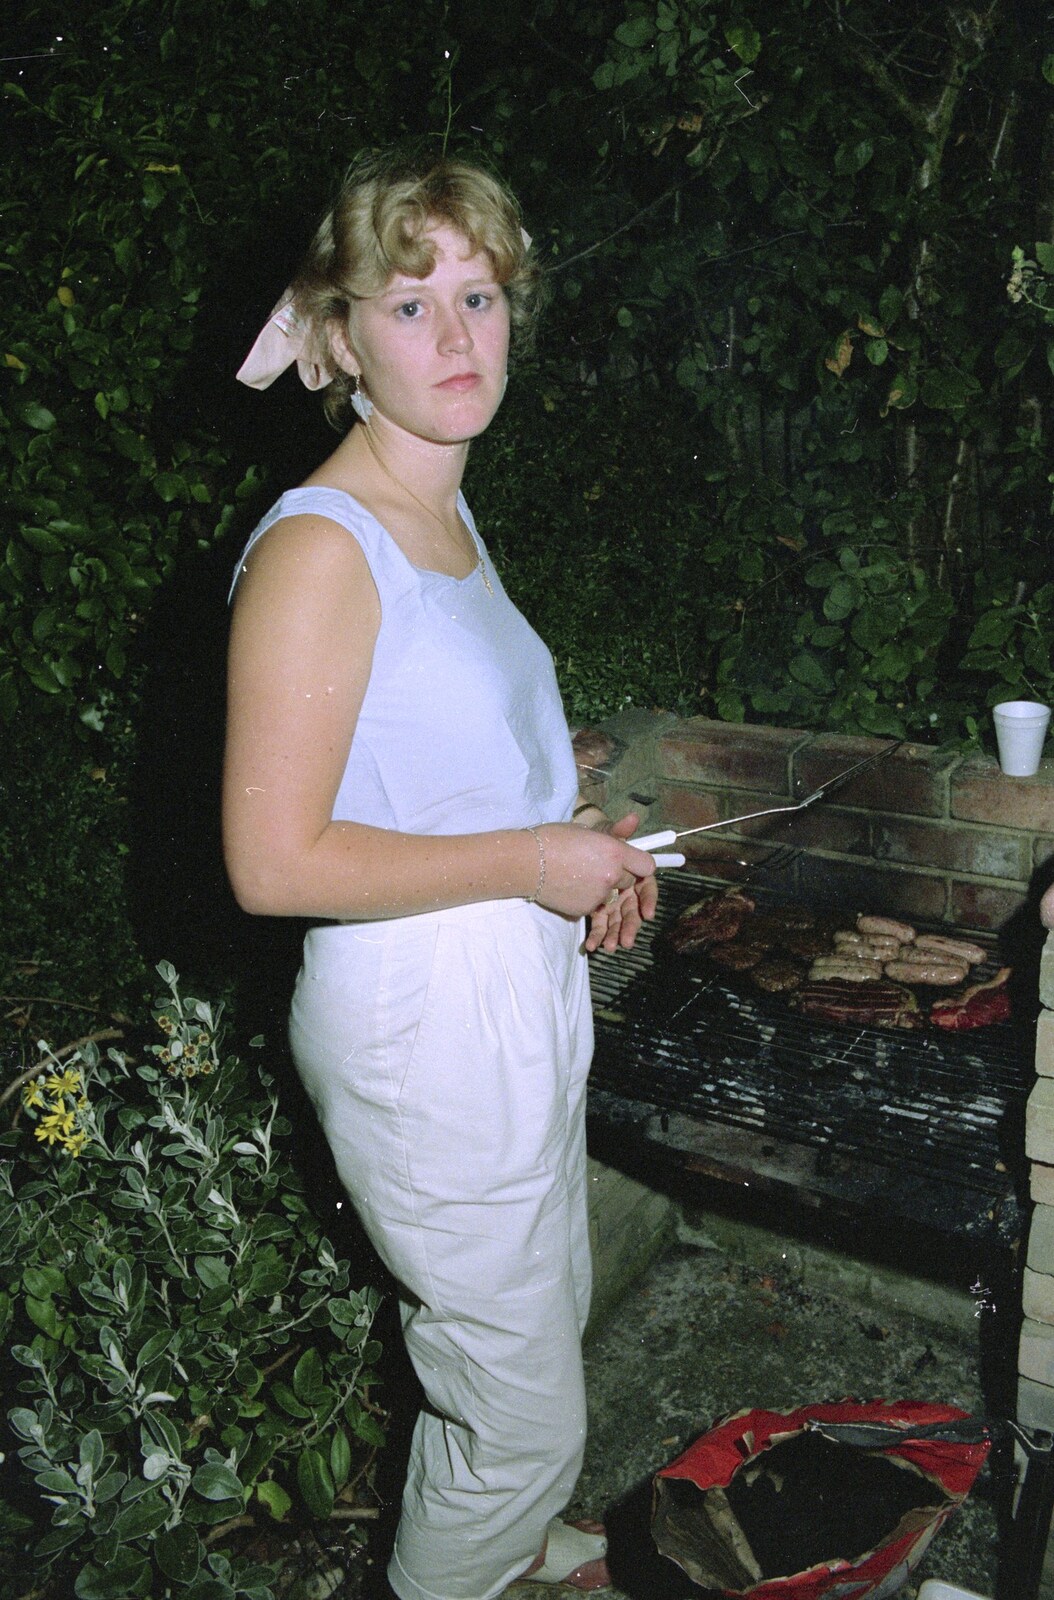 Chris and Phil's Party, Hordle, Hampshire - 6th September 1989: Rosemary looks serious: the fate of the sausages is in the balance